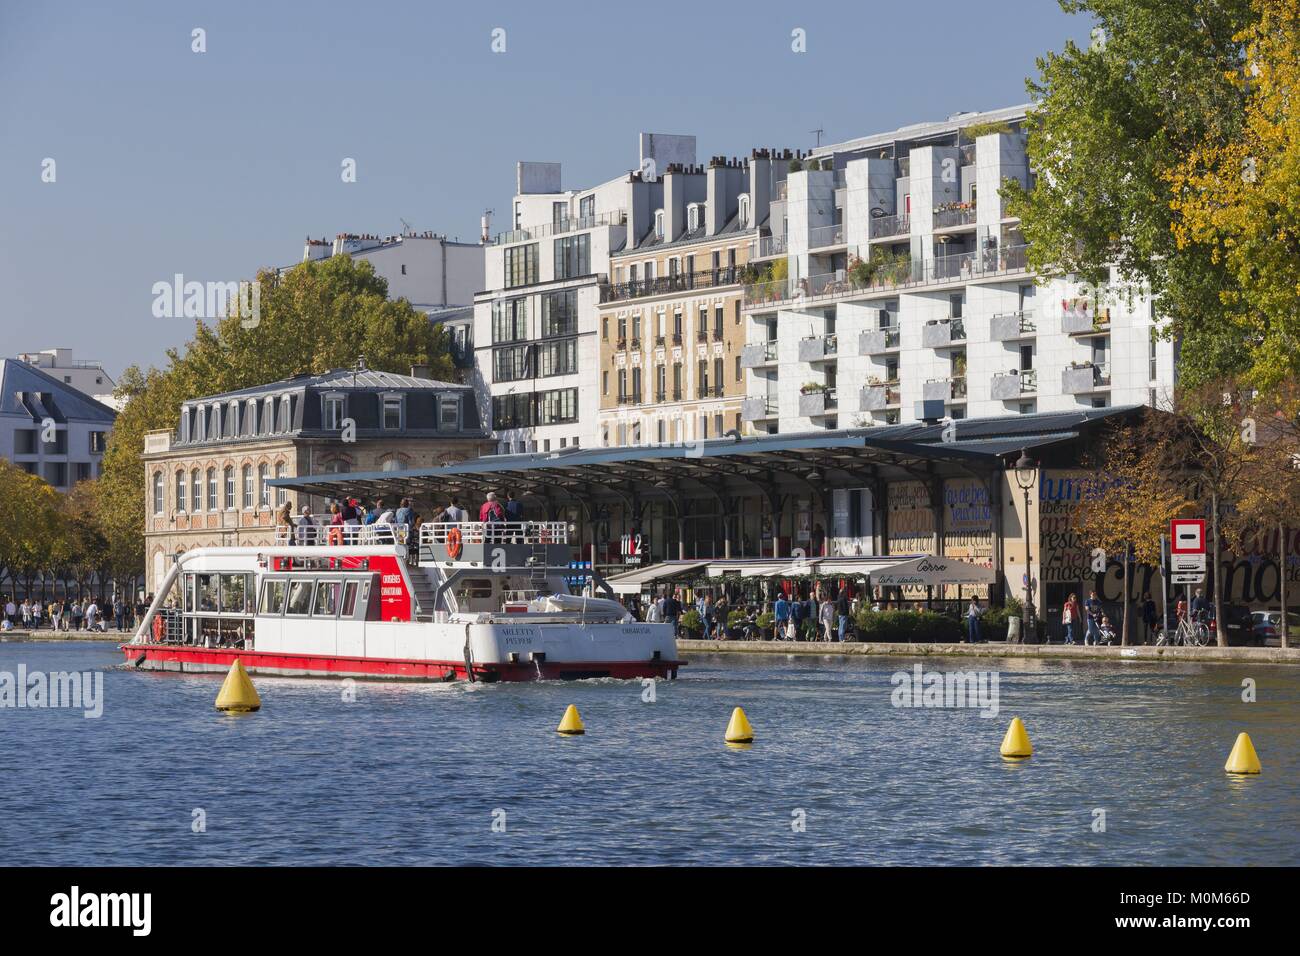 France,Paris,Bassin de la Villette,the largest artificial body of water in Paris,that links the Canal de l'Ourcq to the Canal Saint-Martin,quey of Seine,cruise on the canals Stock Photo